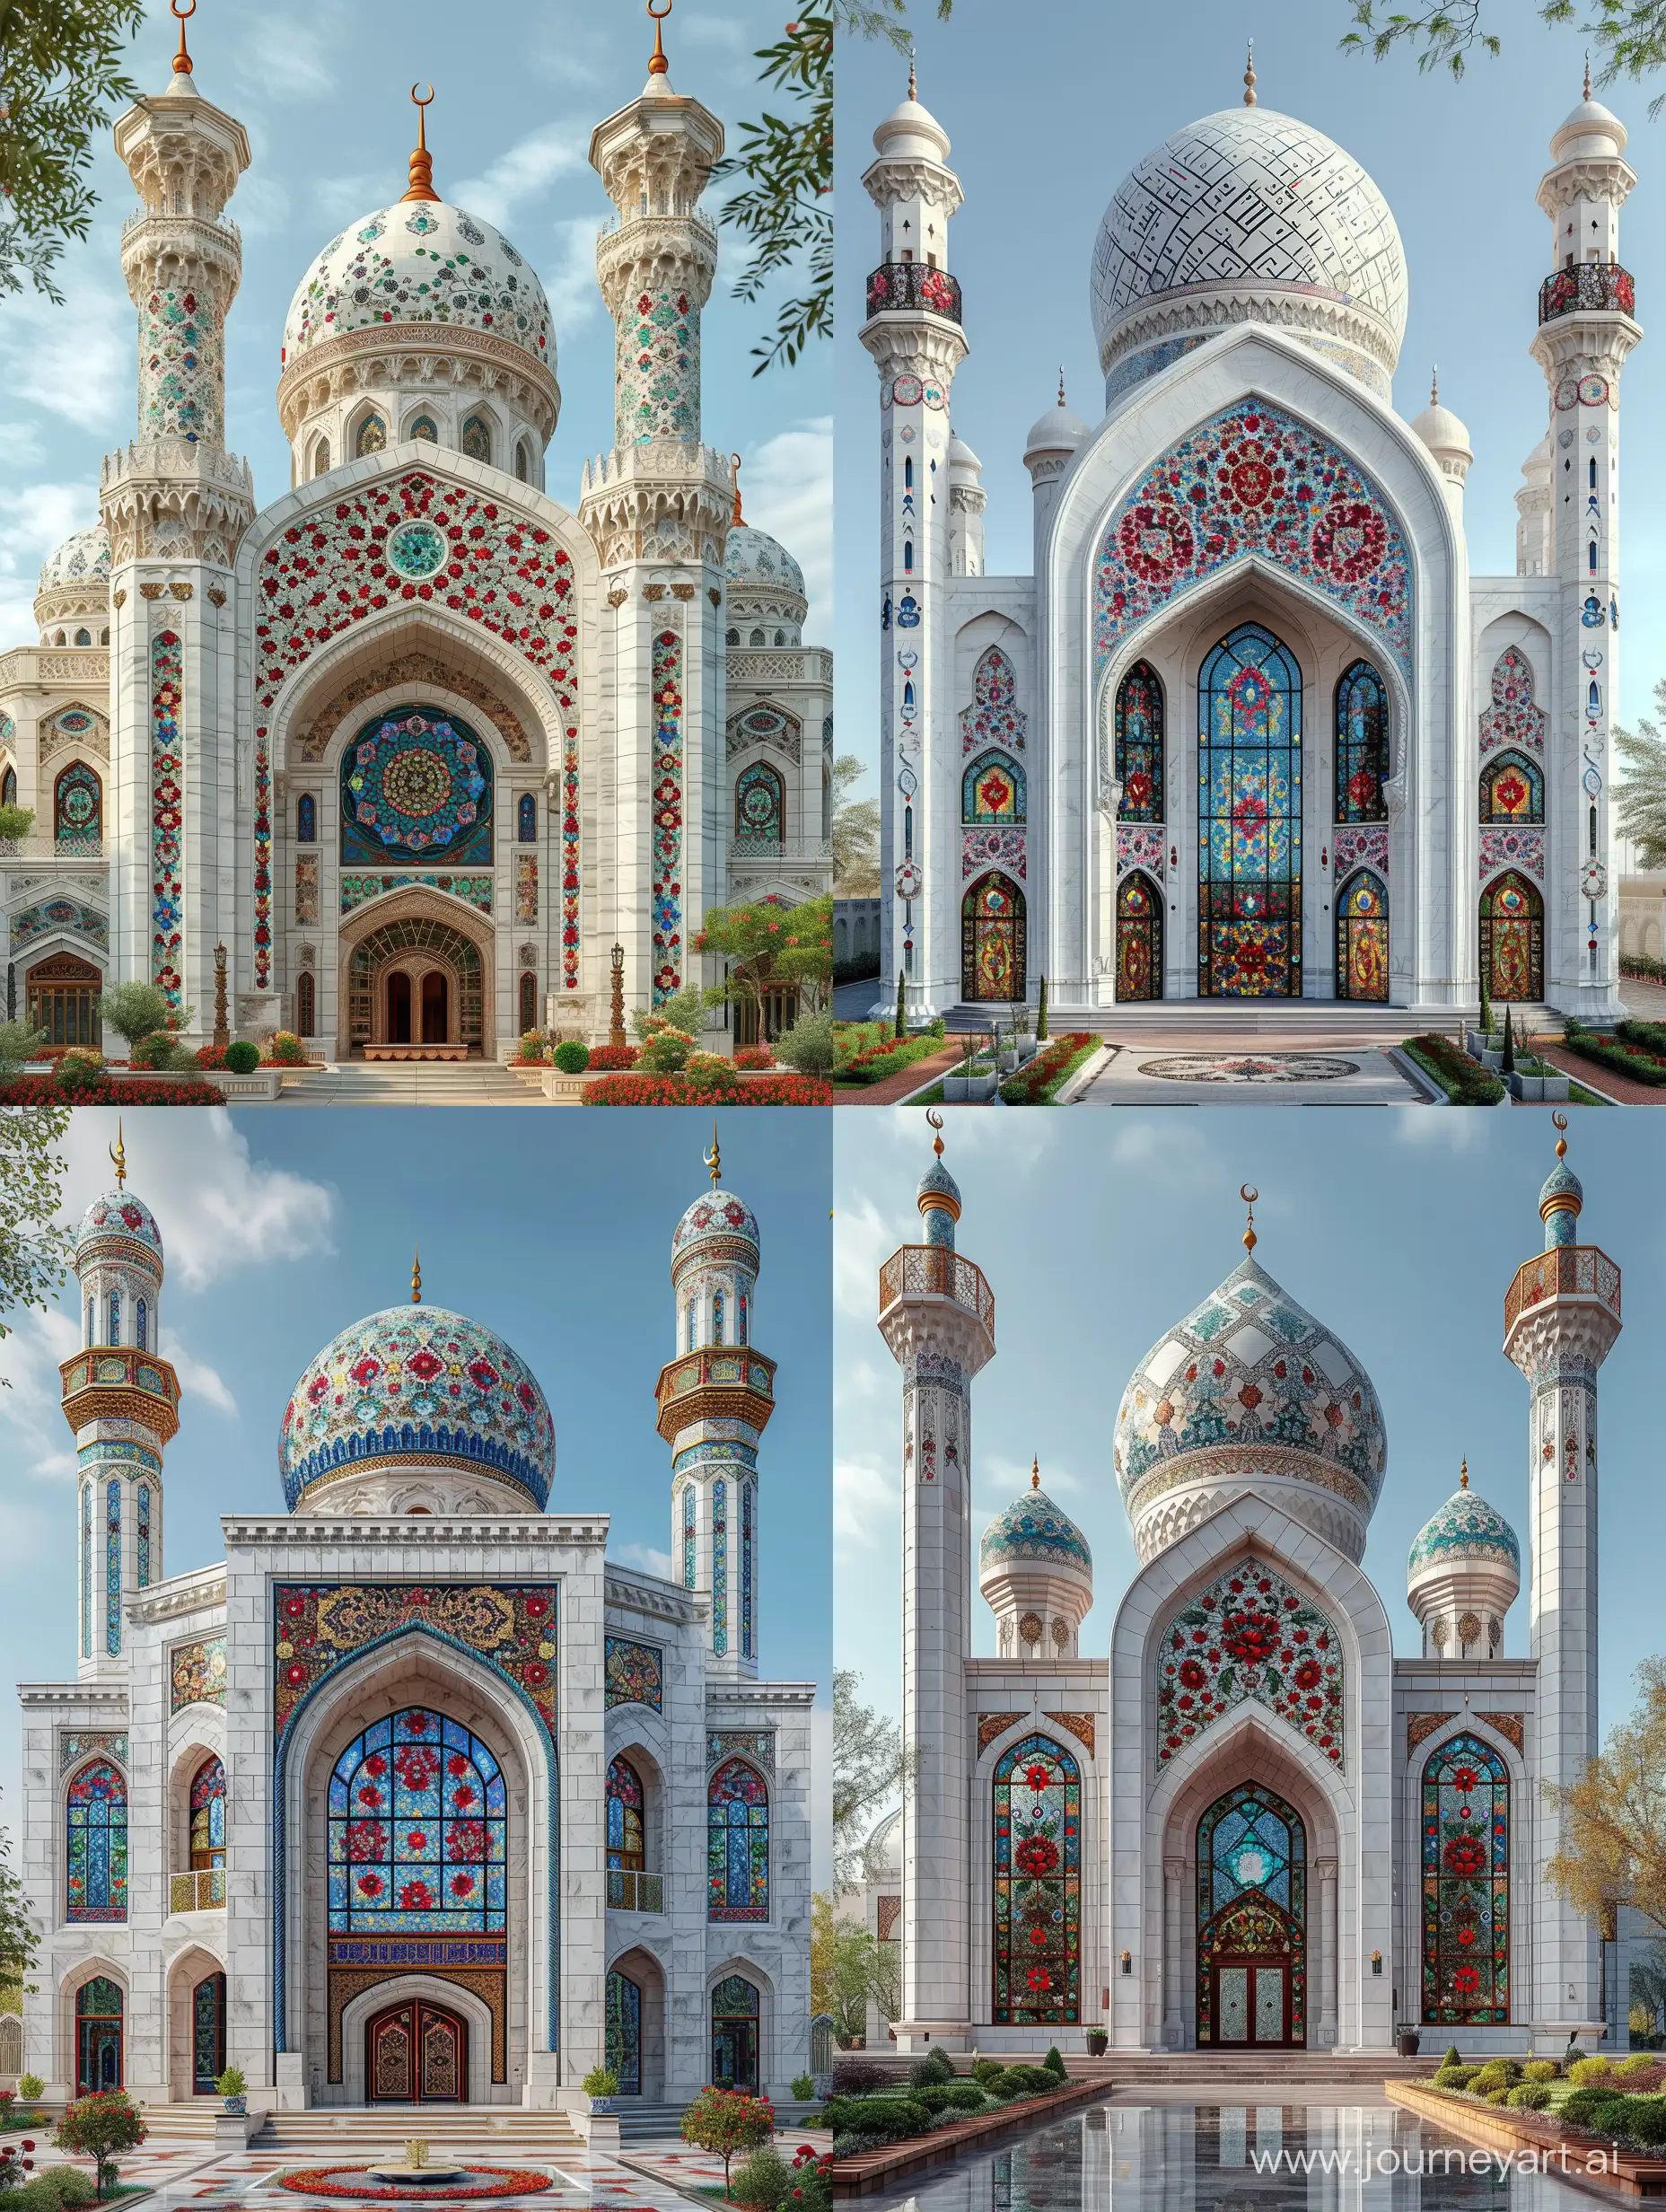 an Uzbekistan style mosque, White marbled exterior, tall iwan, stained glass windows, red blue persian floral motifs on spandrels, red blue gems and rubies embedded on arabesque ornaments, thin spires, full view, front view --s 999